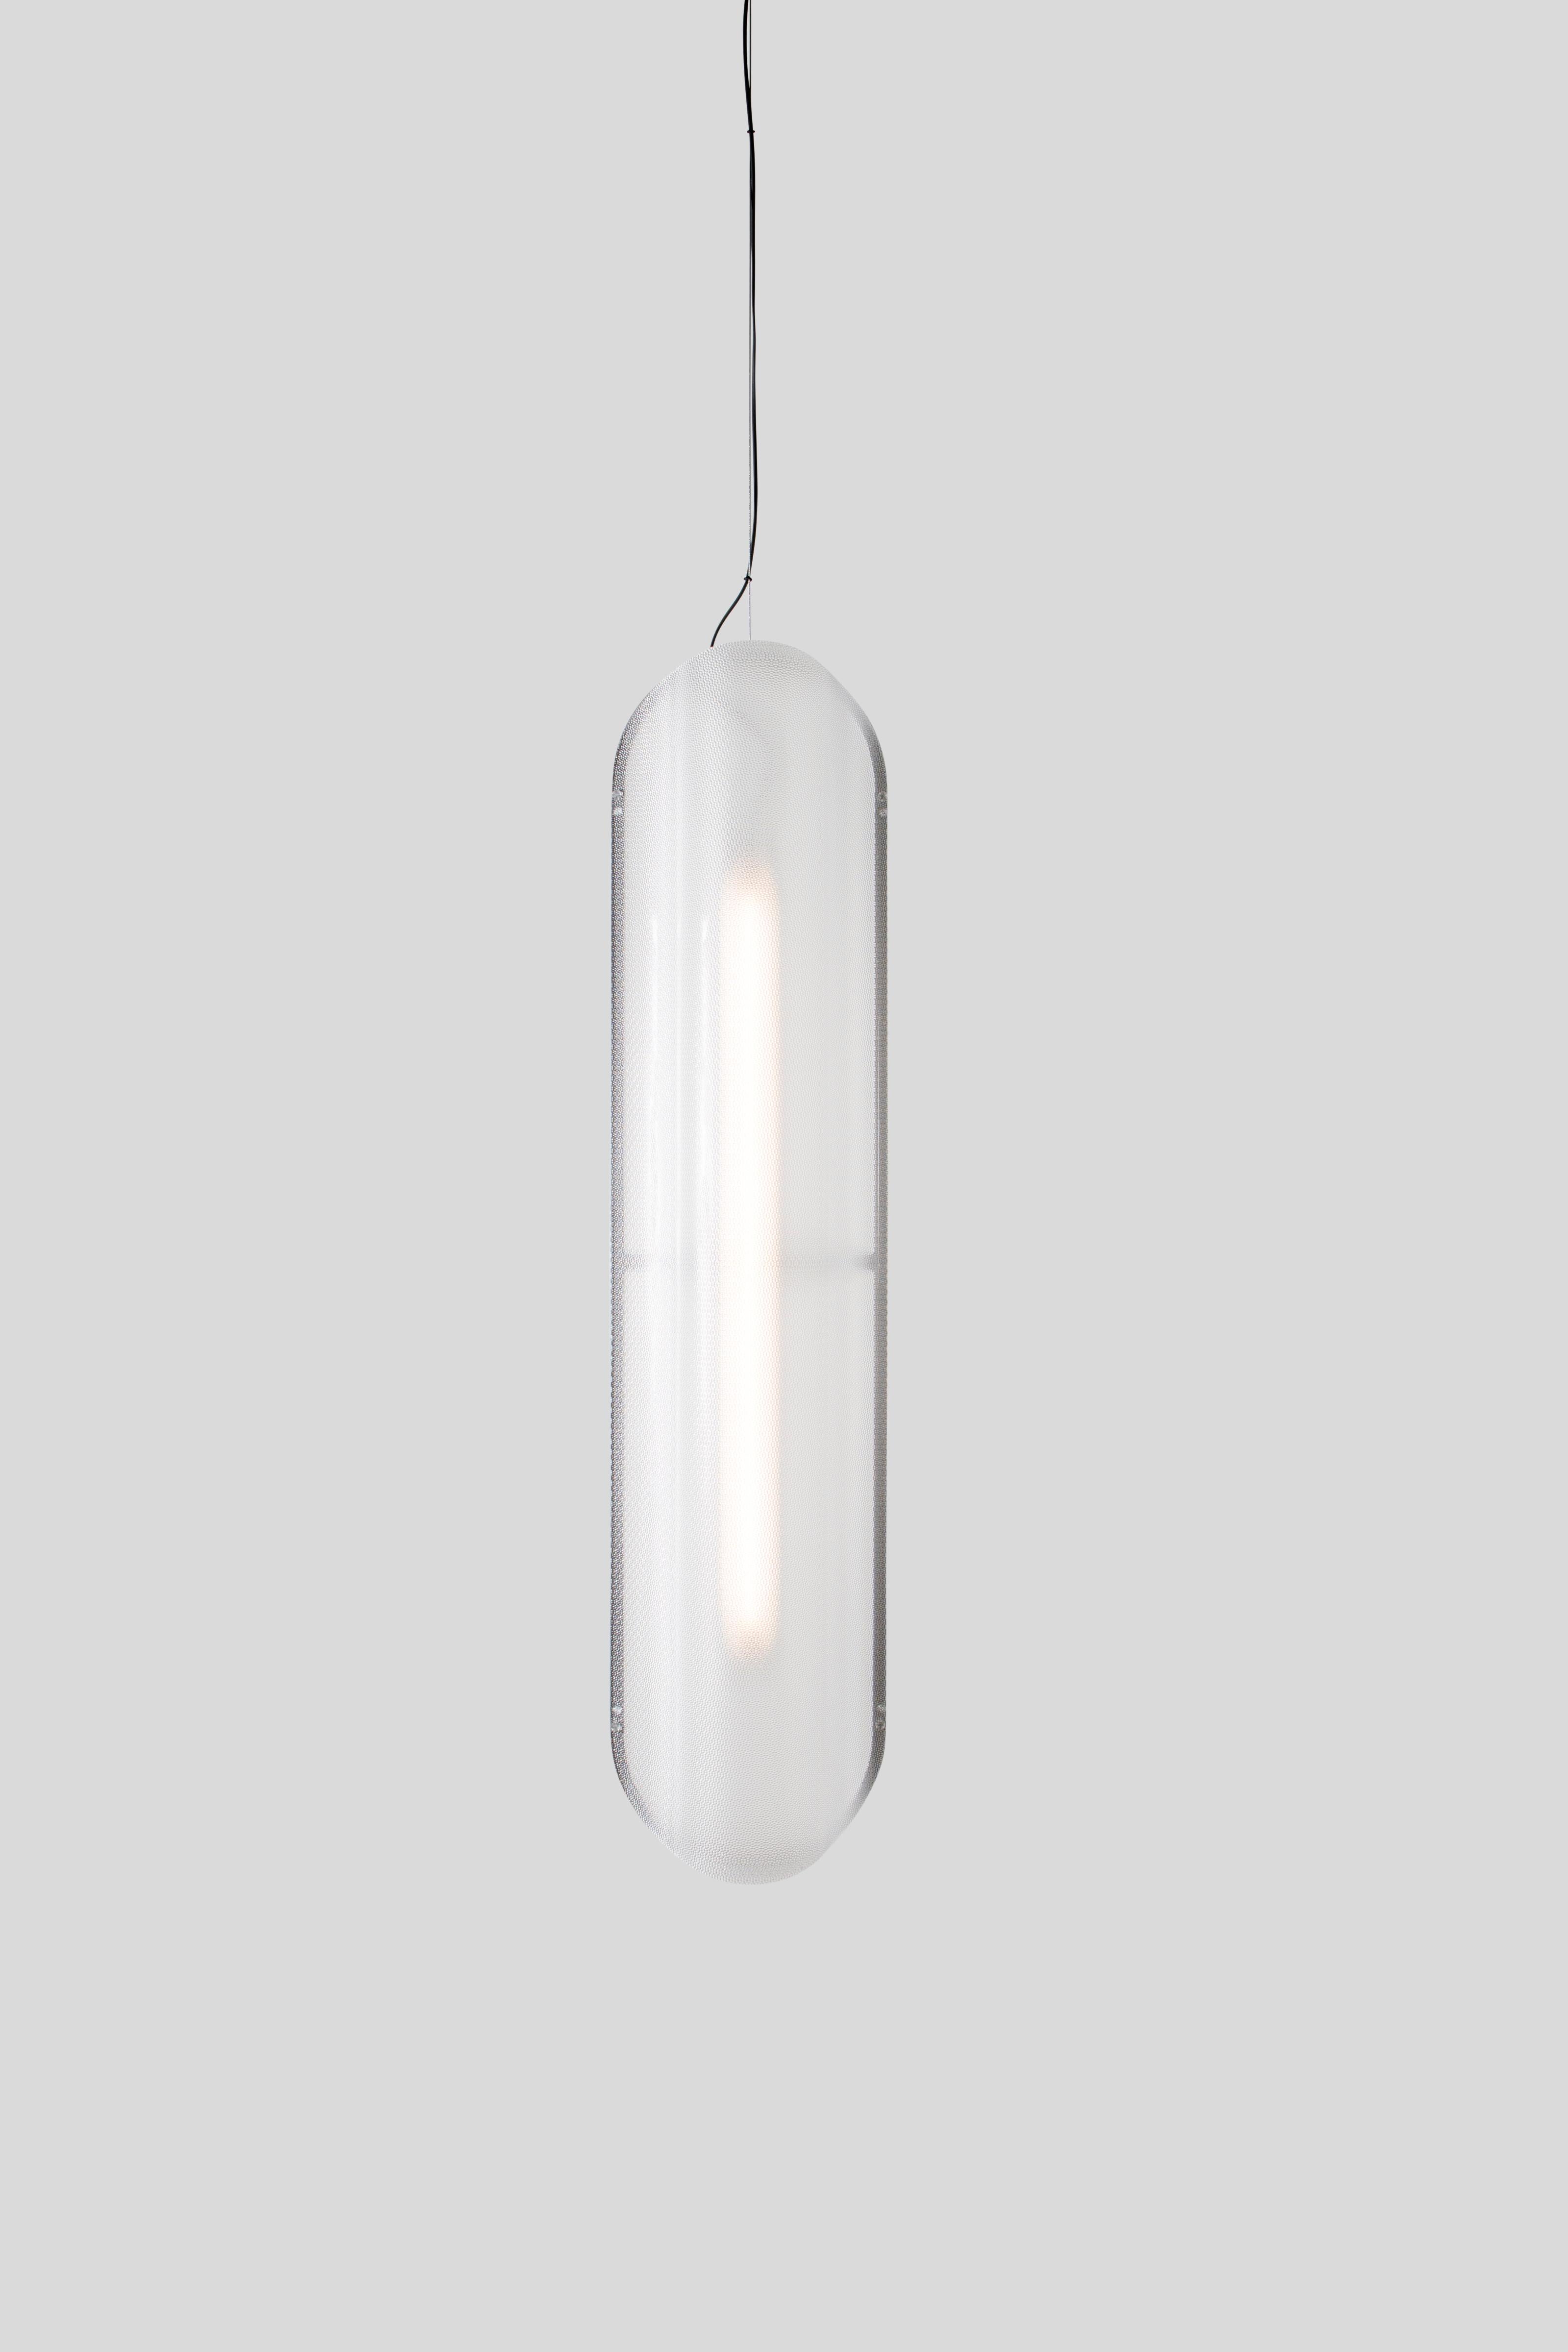 Organic Modern Contemporary Pendant Lamp VALE, Vertical 1 For Sale